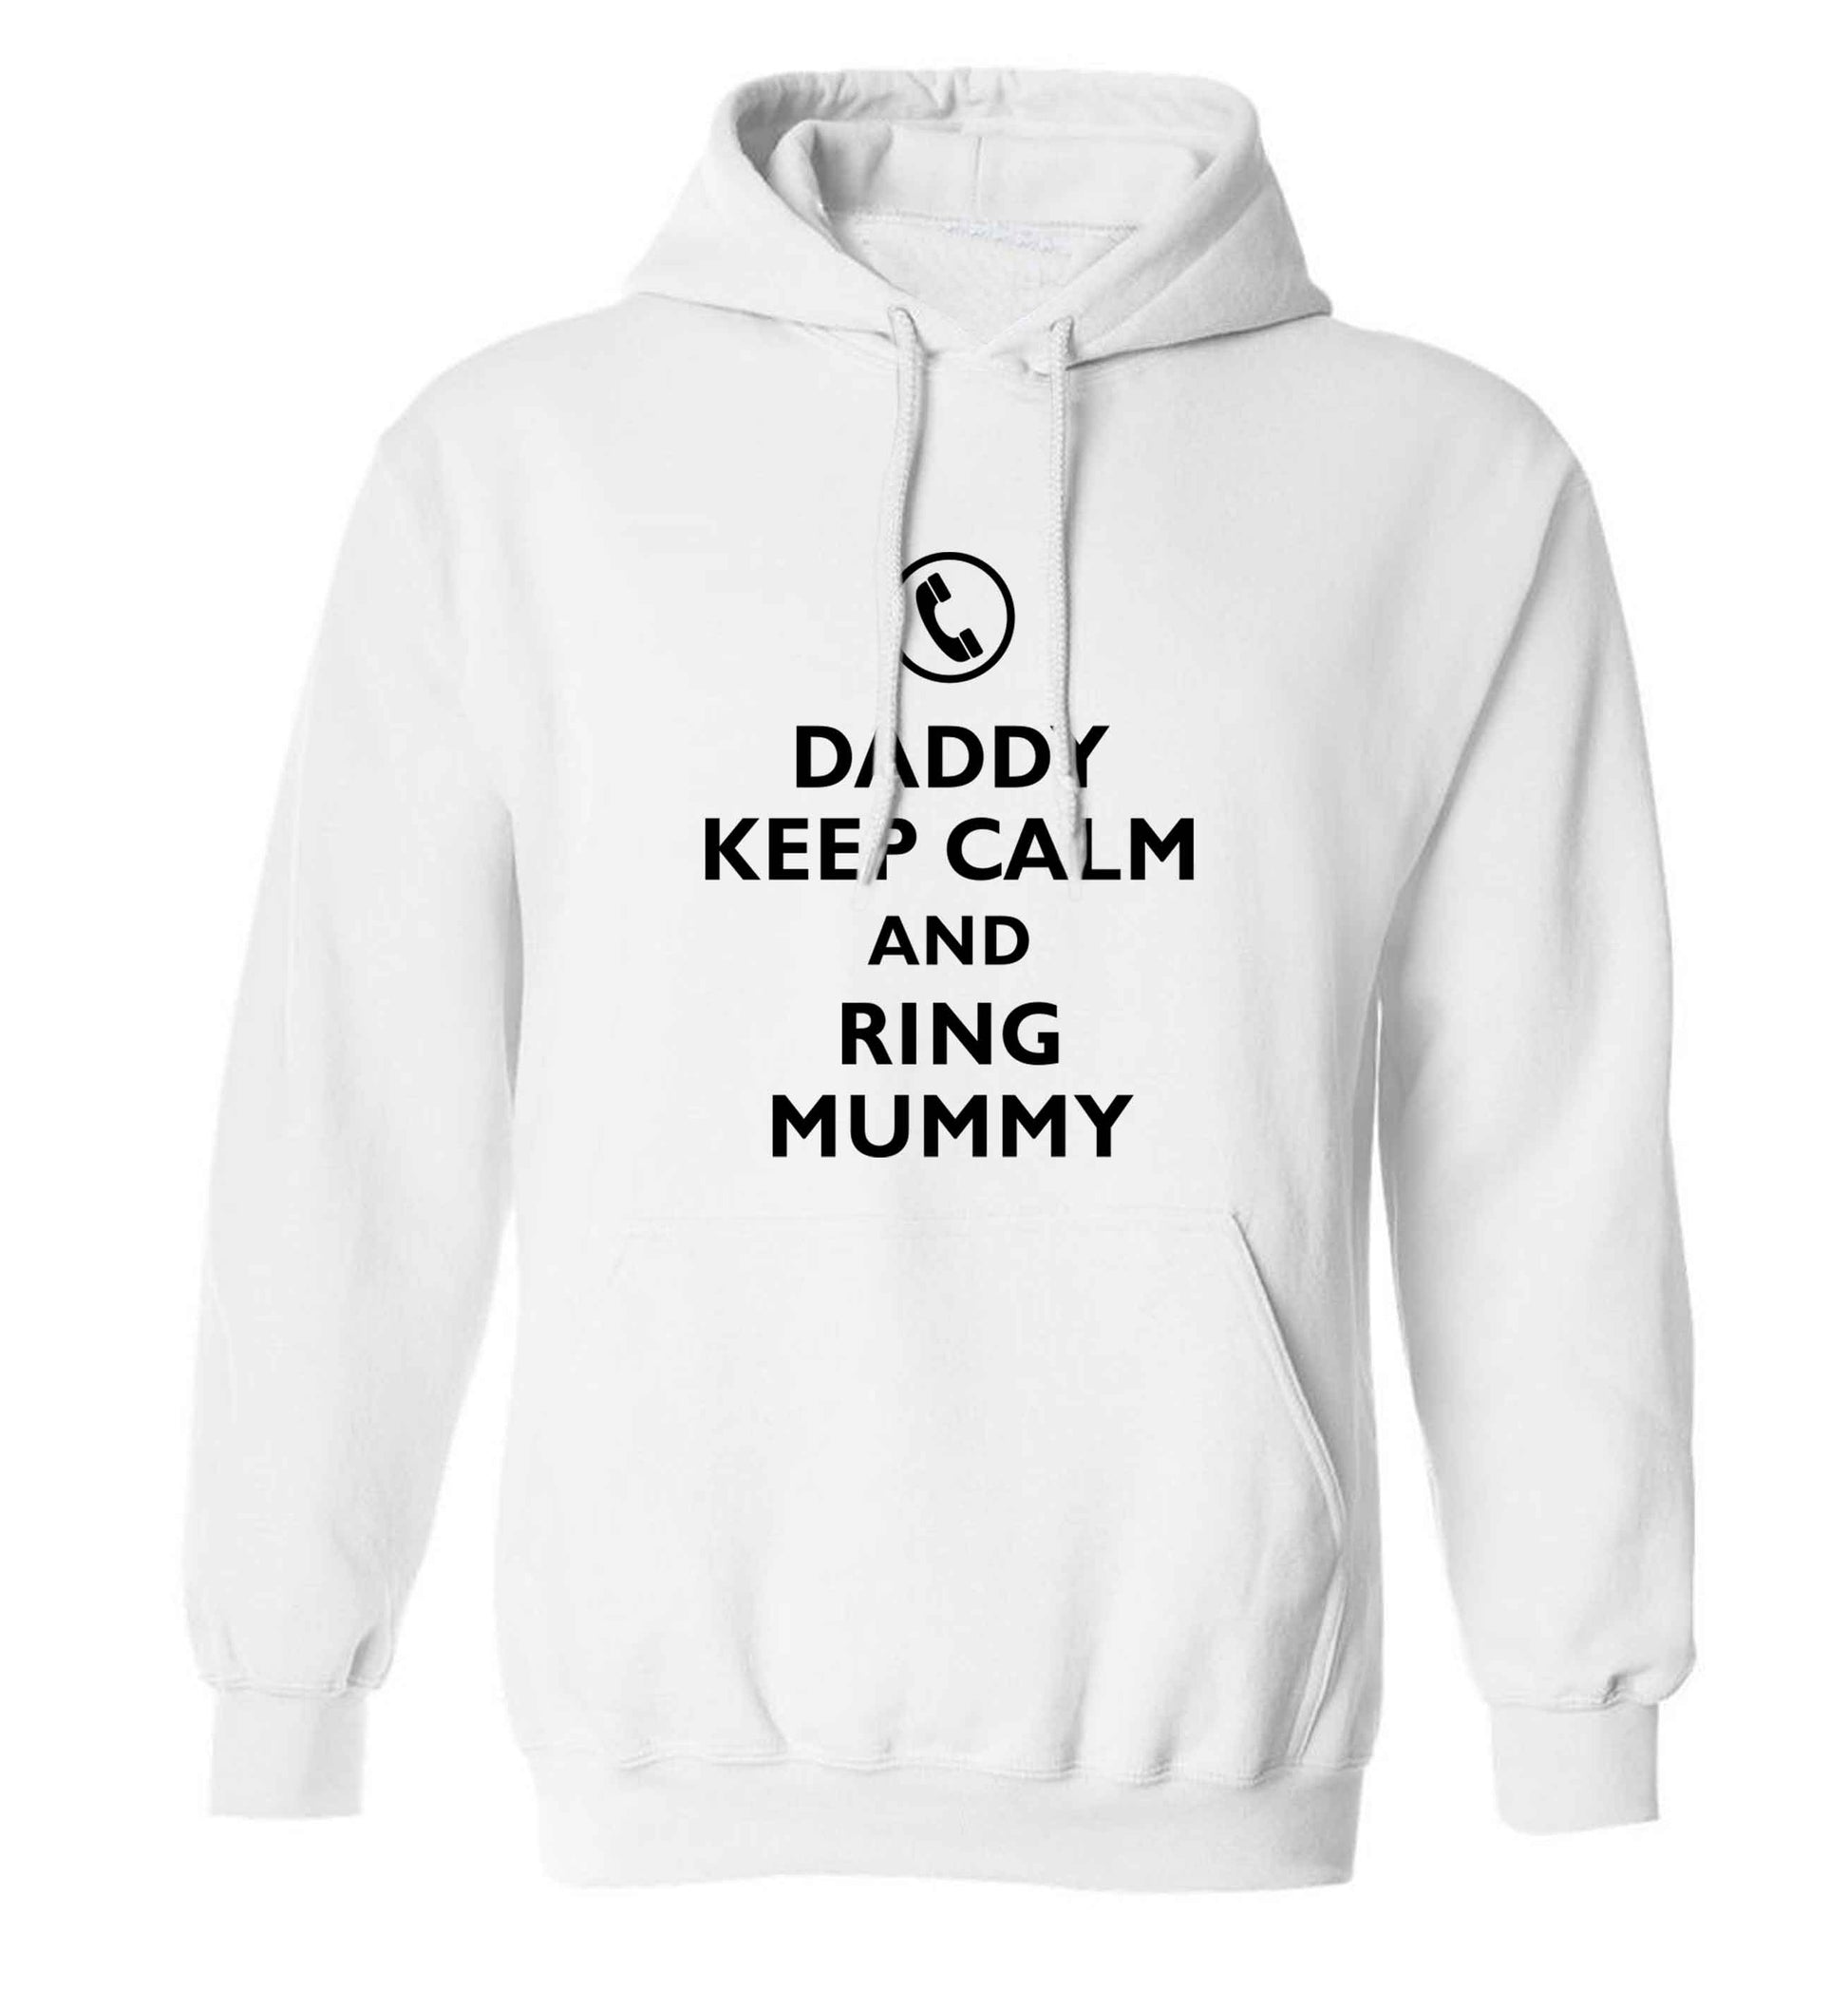 Daddy keep calm and ring mummy adults unisex white hoodie 2XL